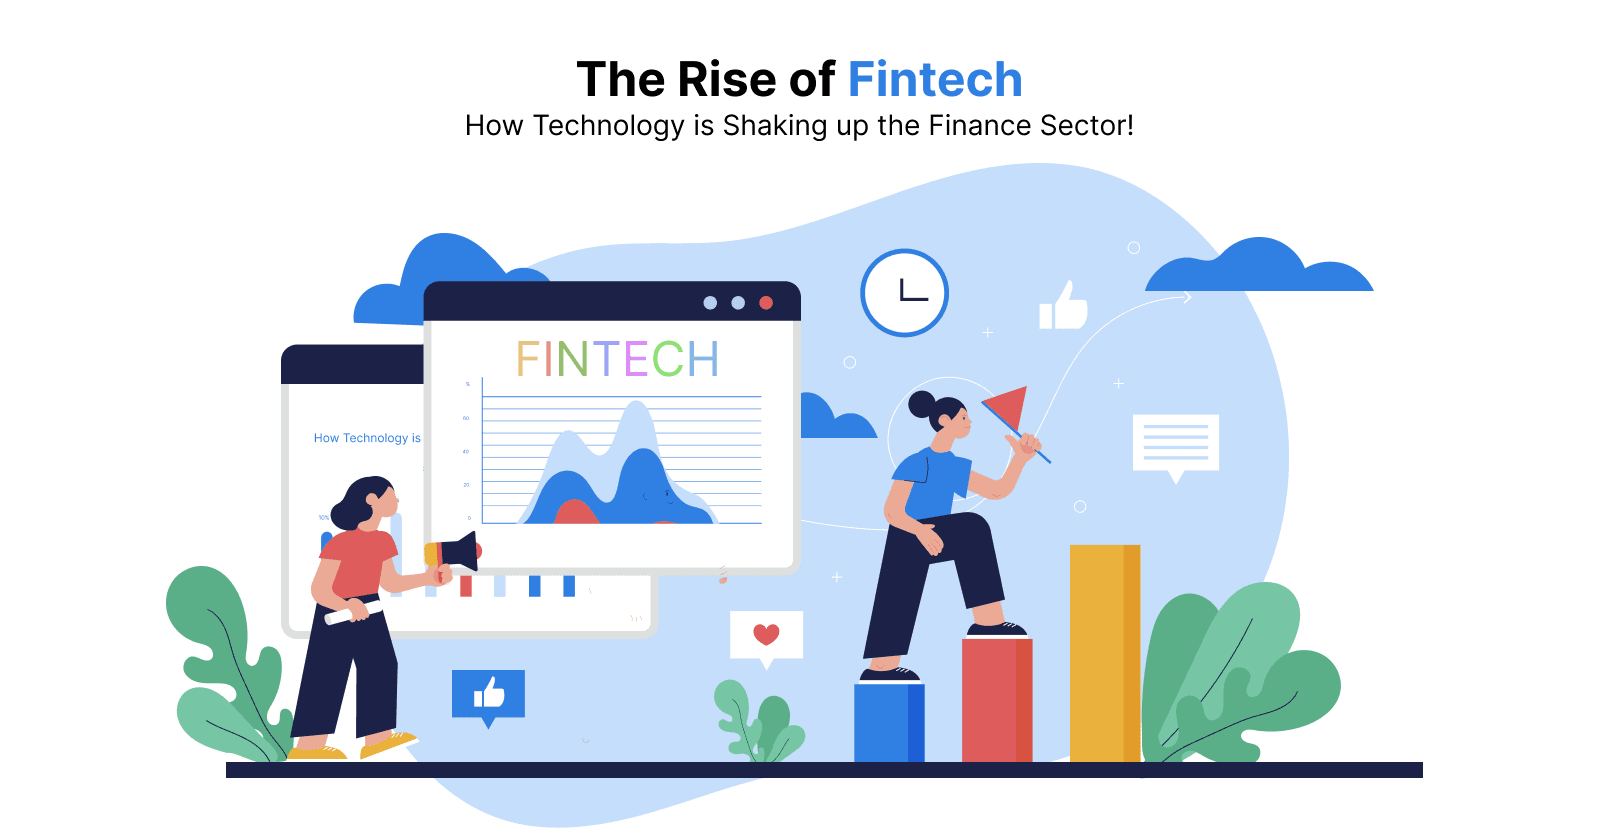 The Rise of Fintech: How Technology is Shaking up the Finance Sector!